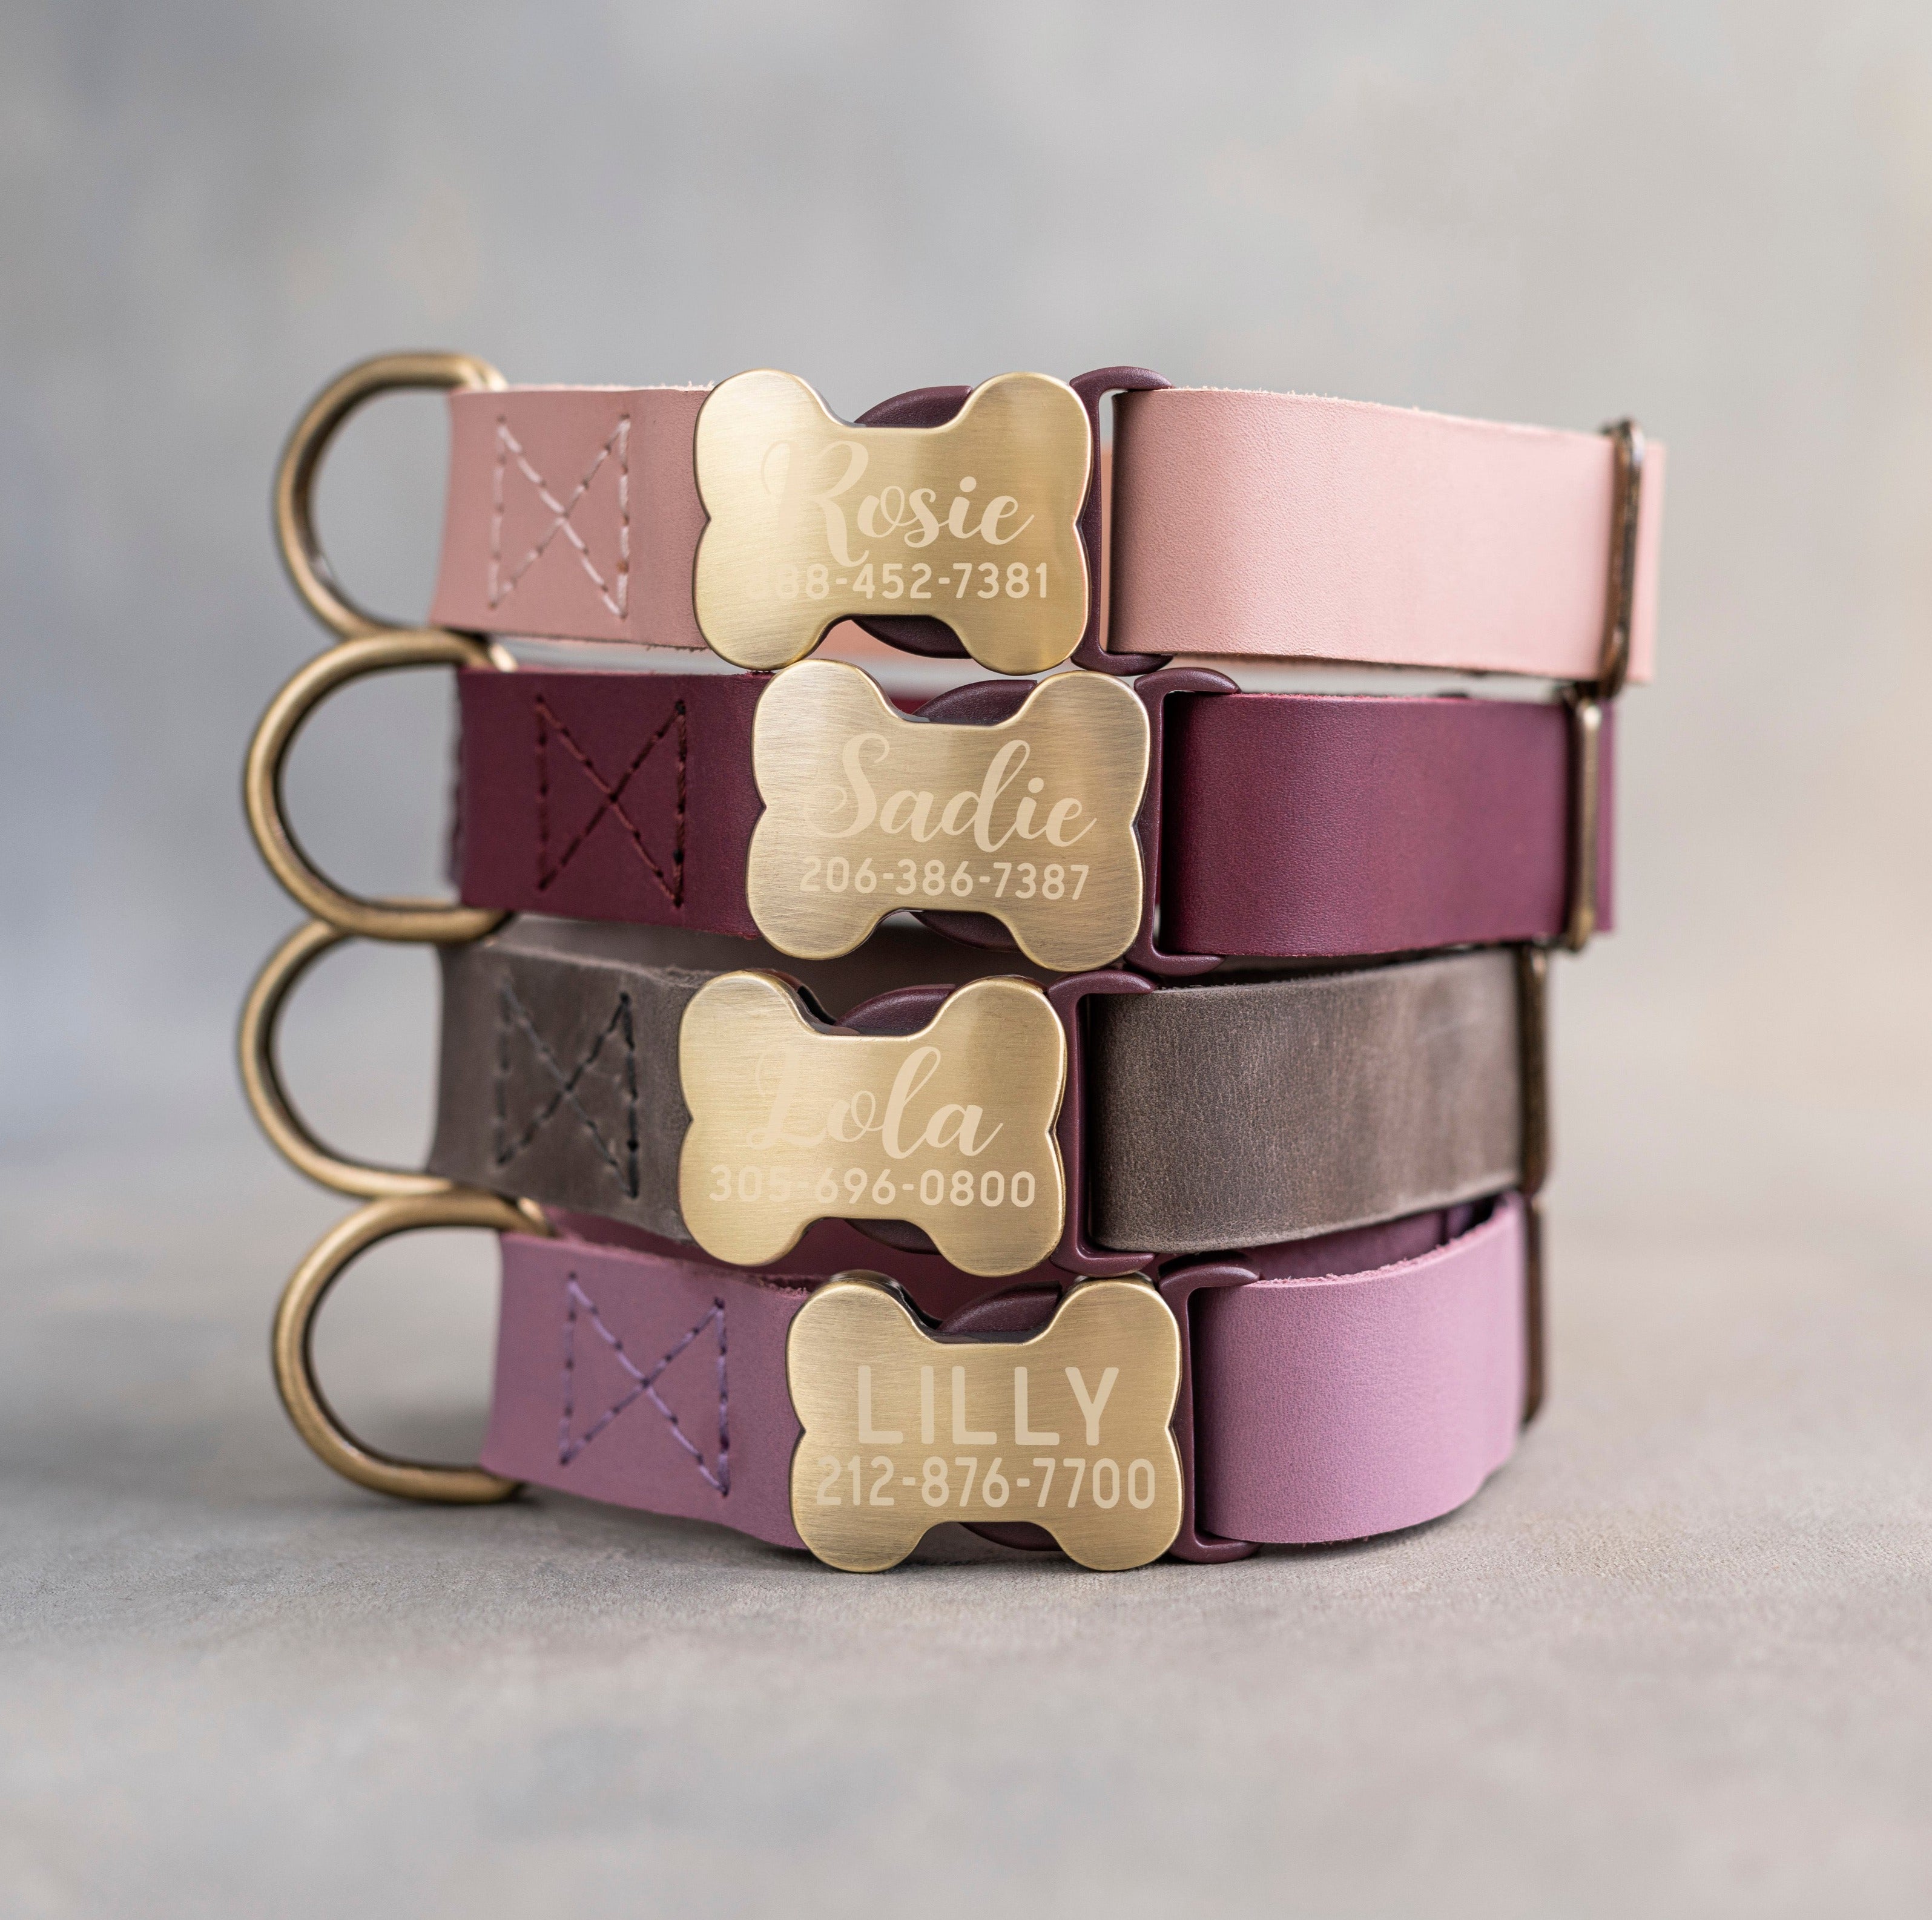 Personalised puppy collar